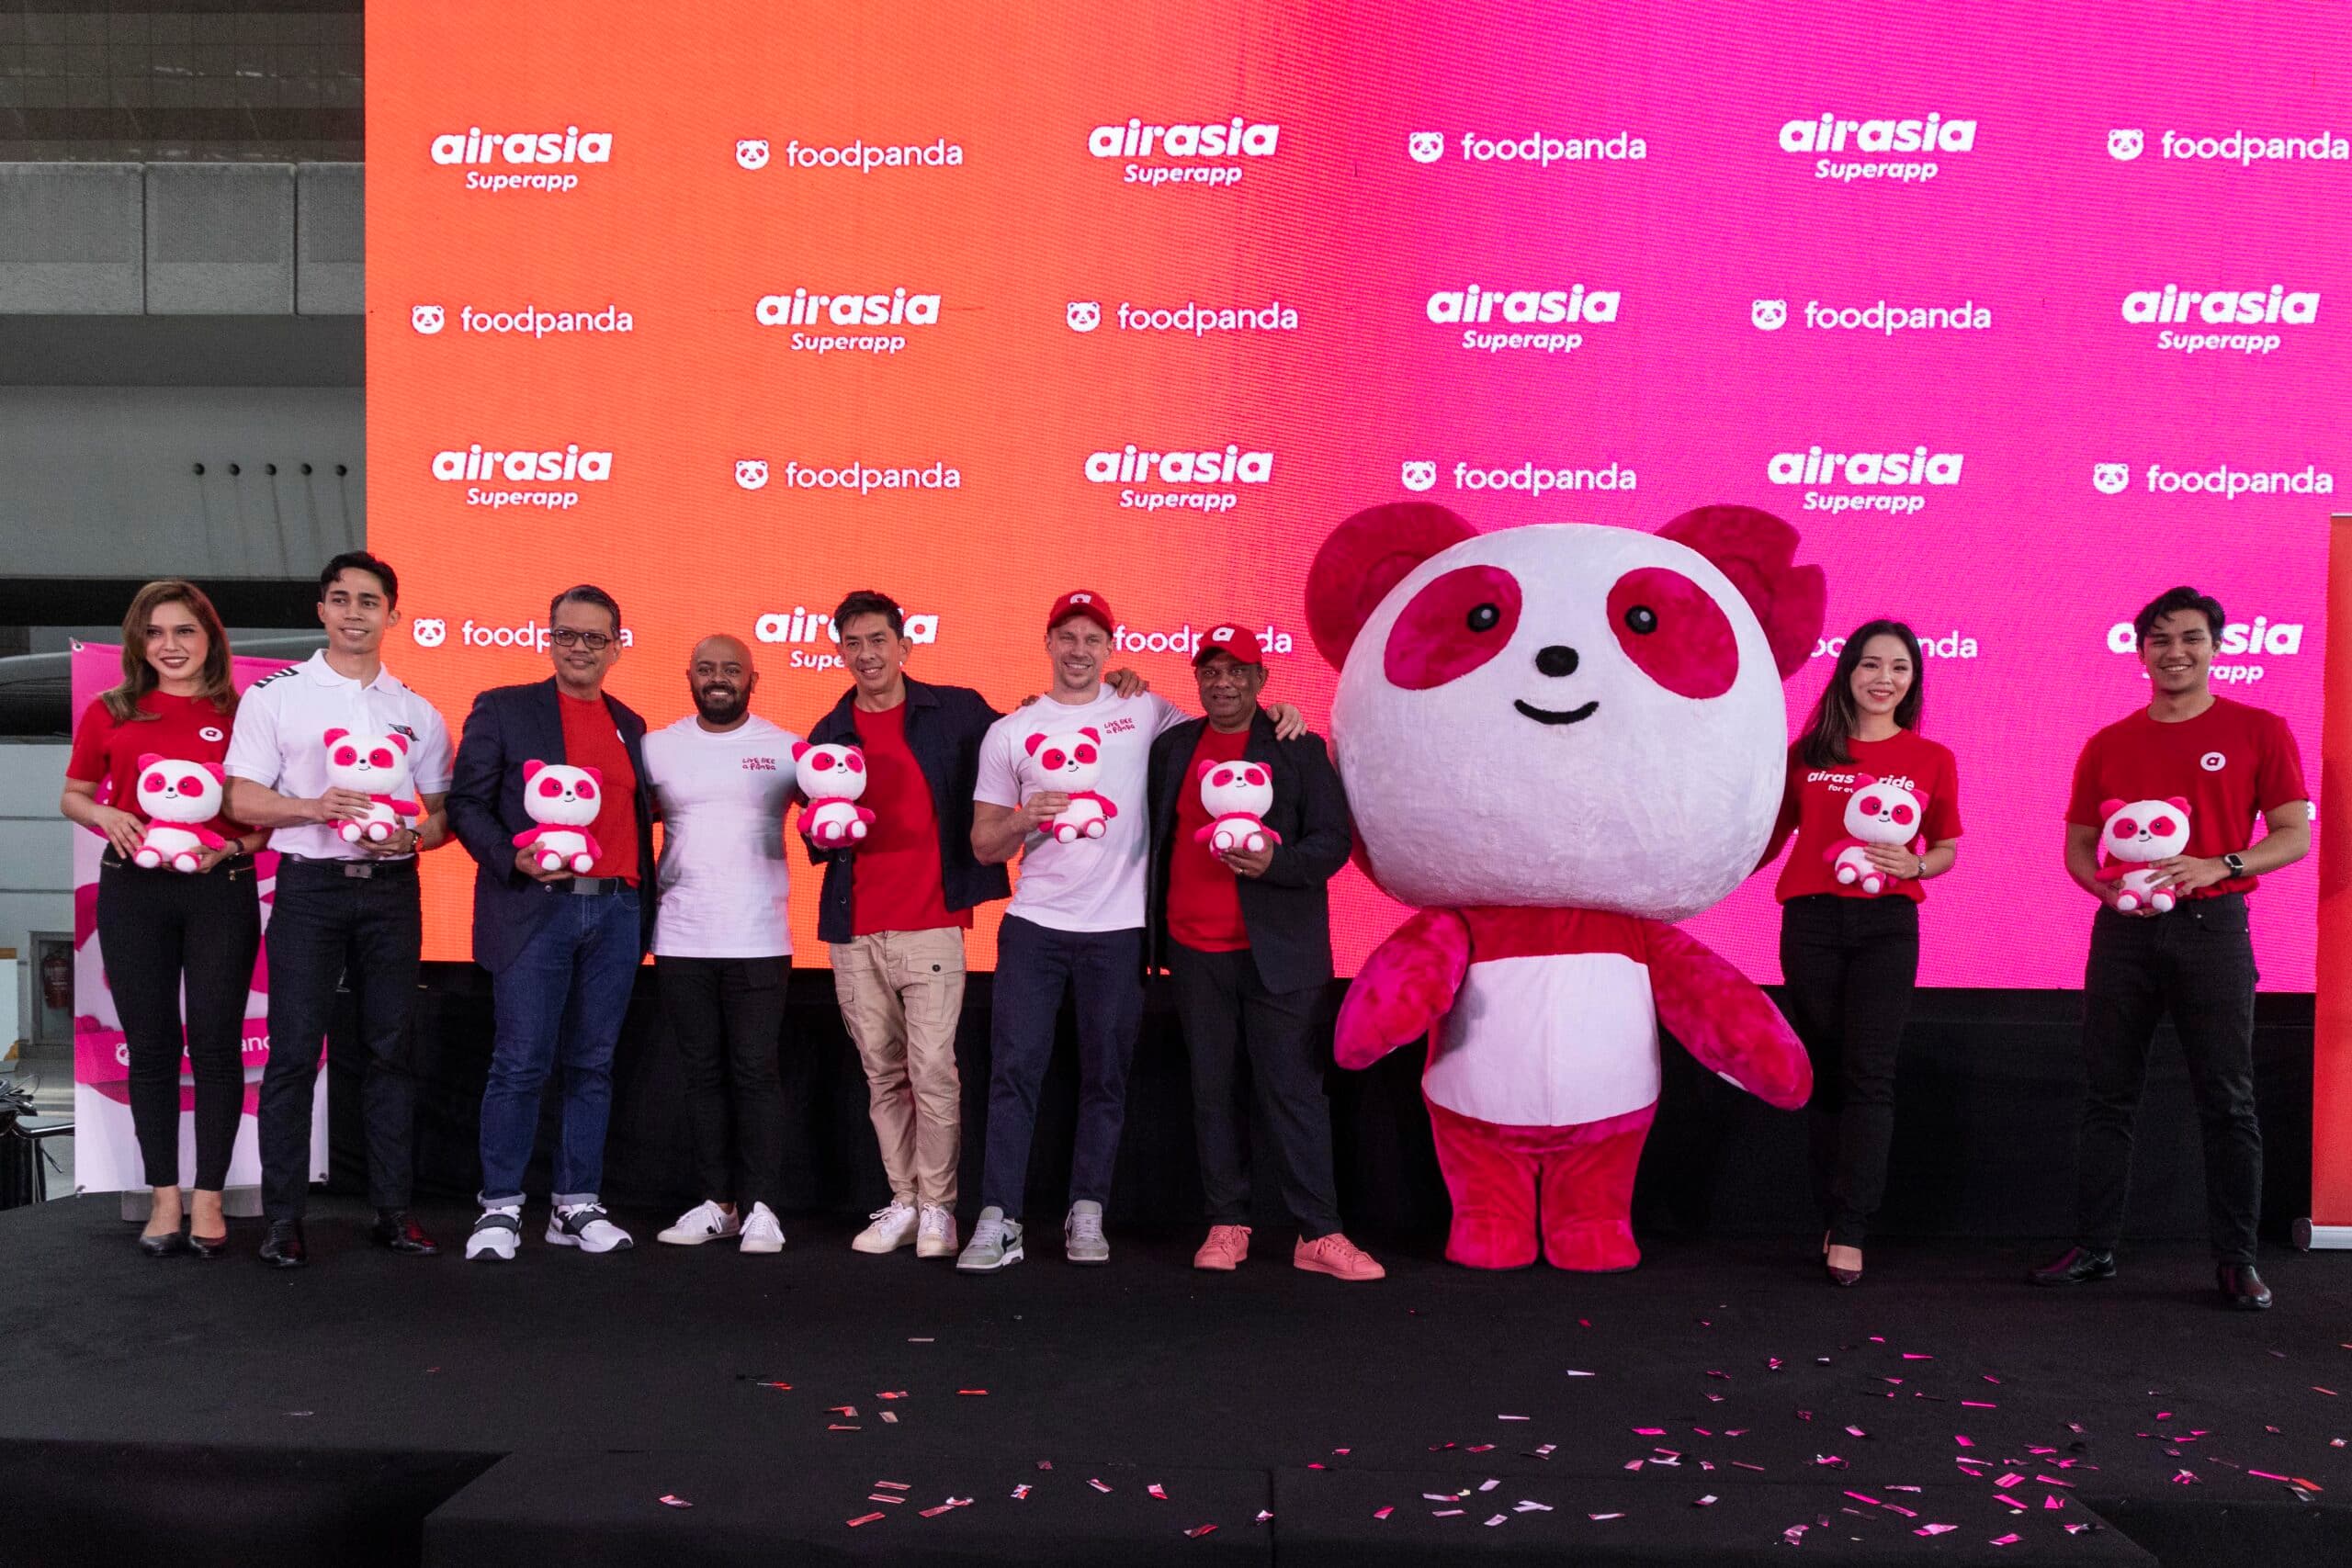 Image - “Red meets pink” – airasia Superapp & foodpanda join forces for a groundbreaking partnership